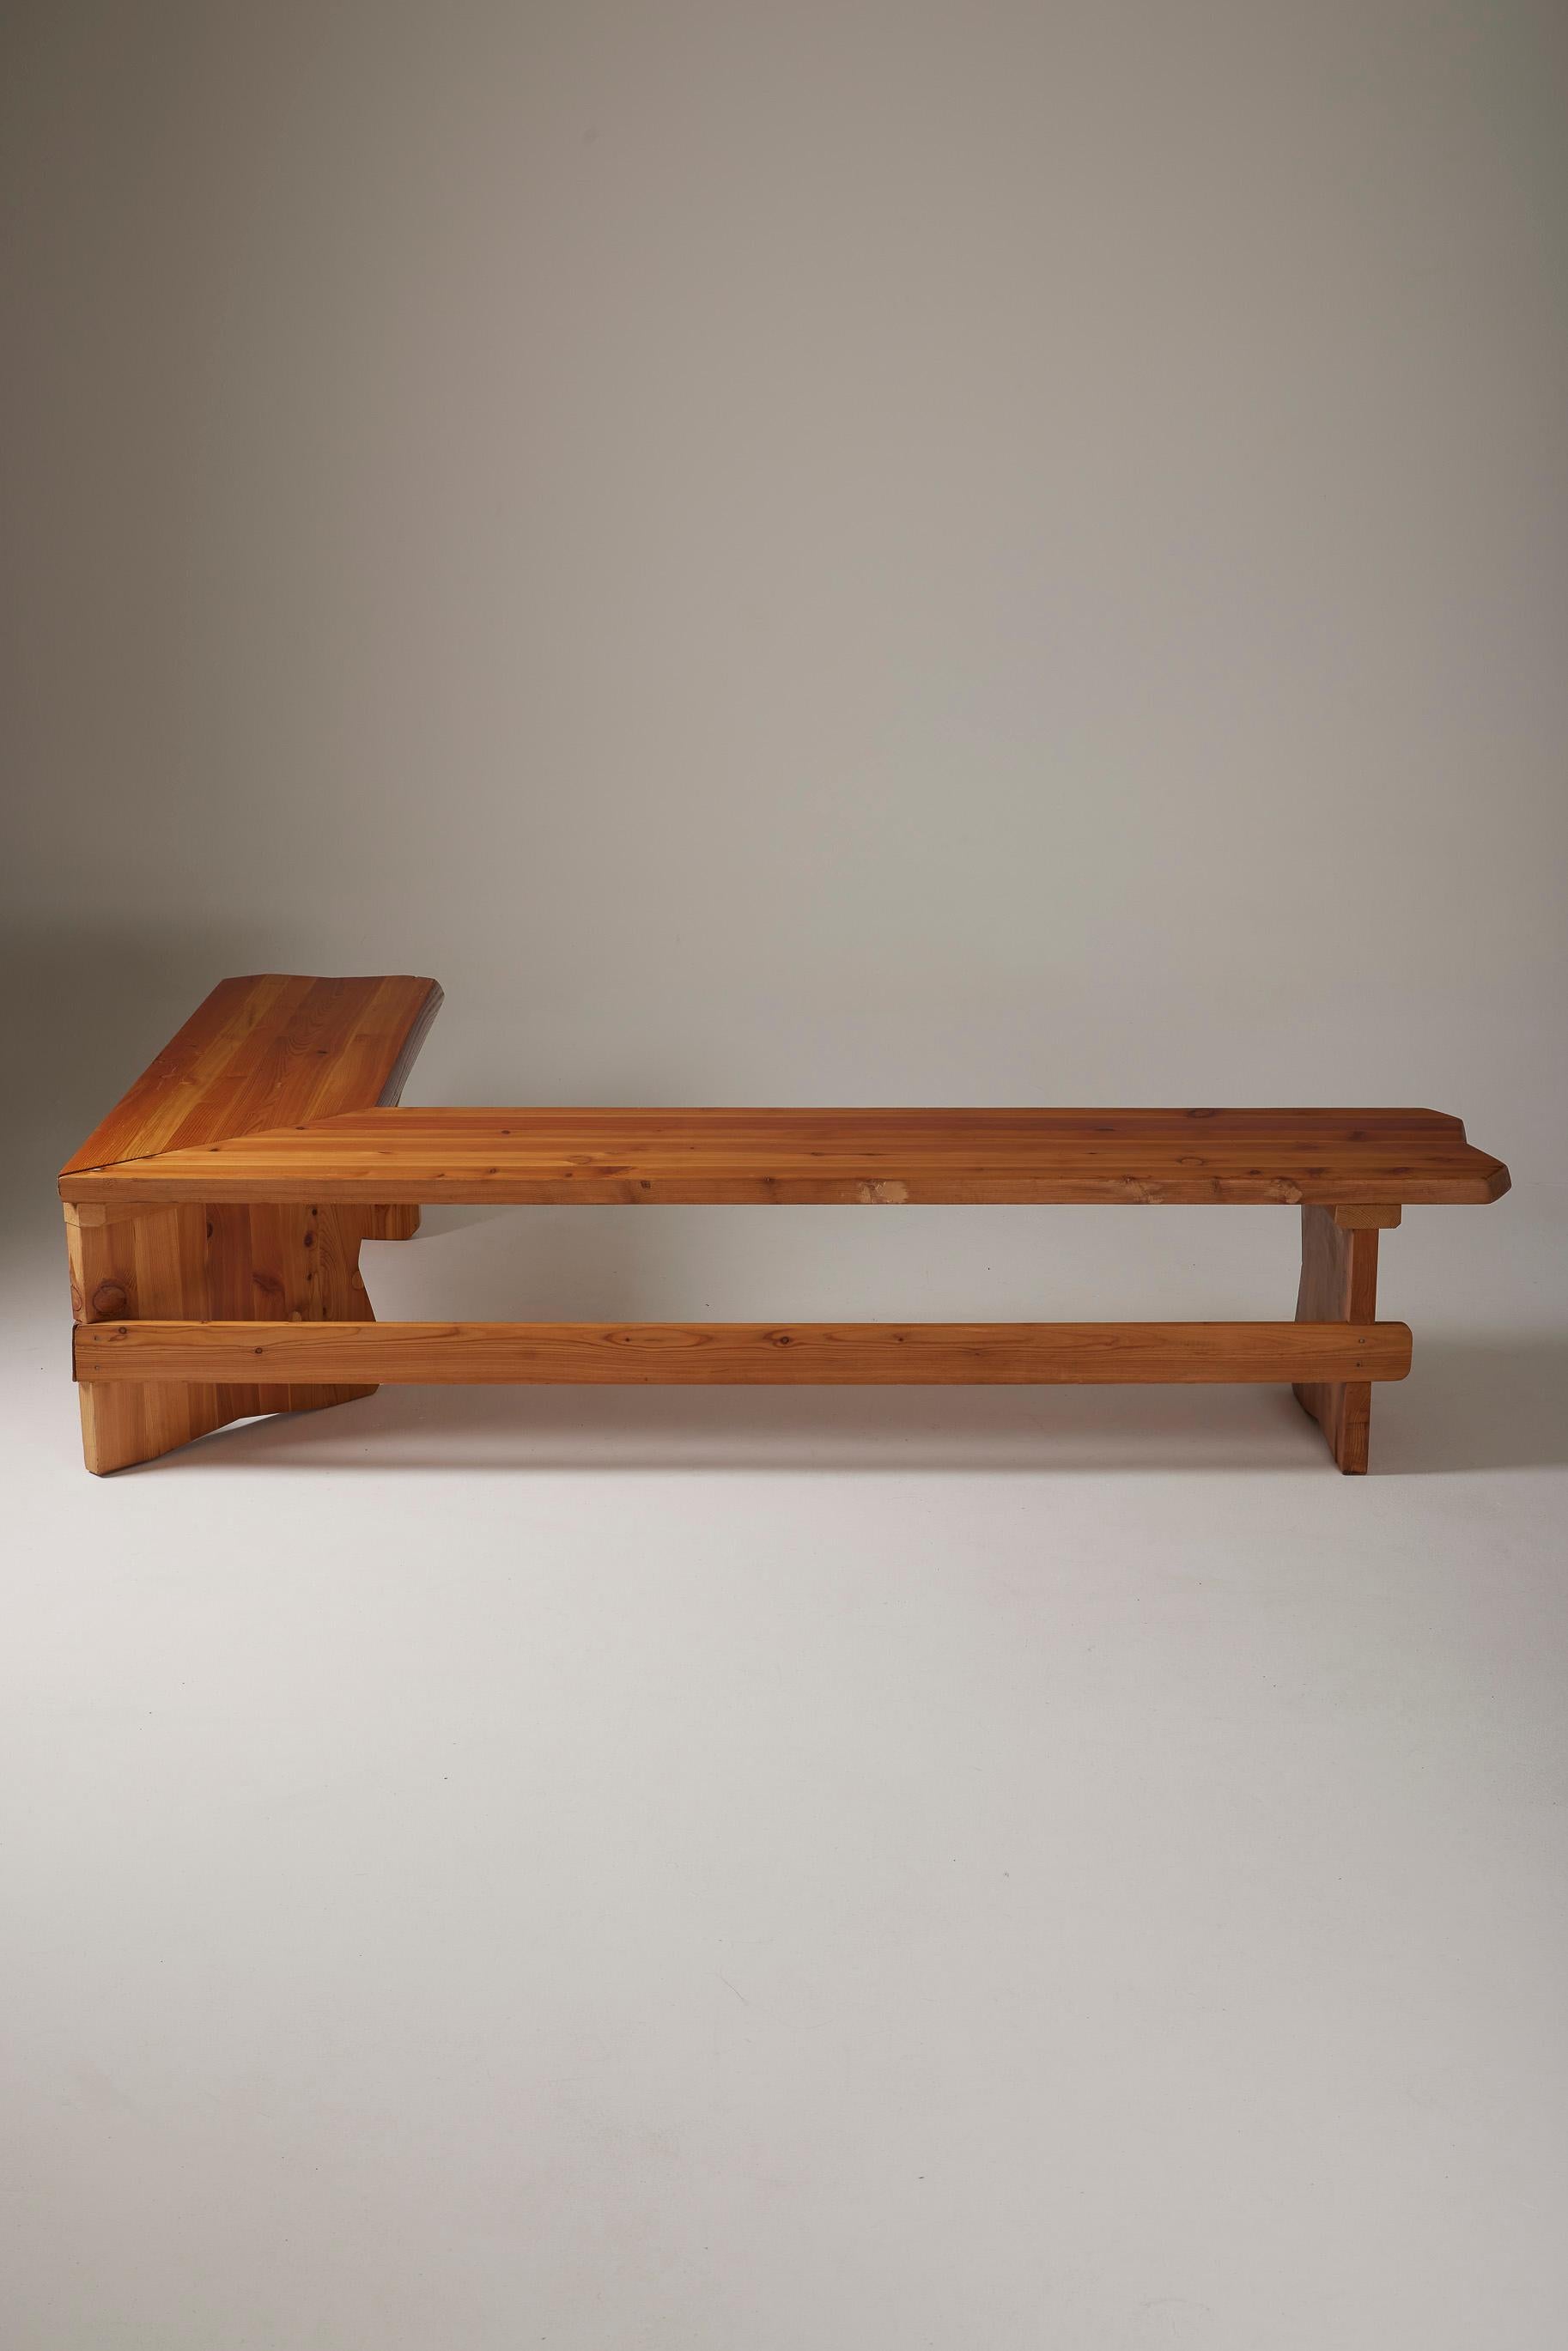 Corner solid pine bench in the style of Charlotte Perriand from the 1970s. Beautiful patina. Origin: Czech Republic.
LP2822